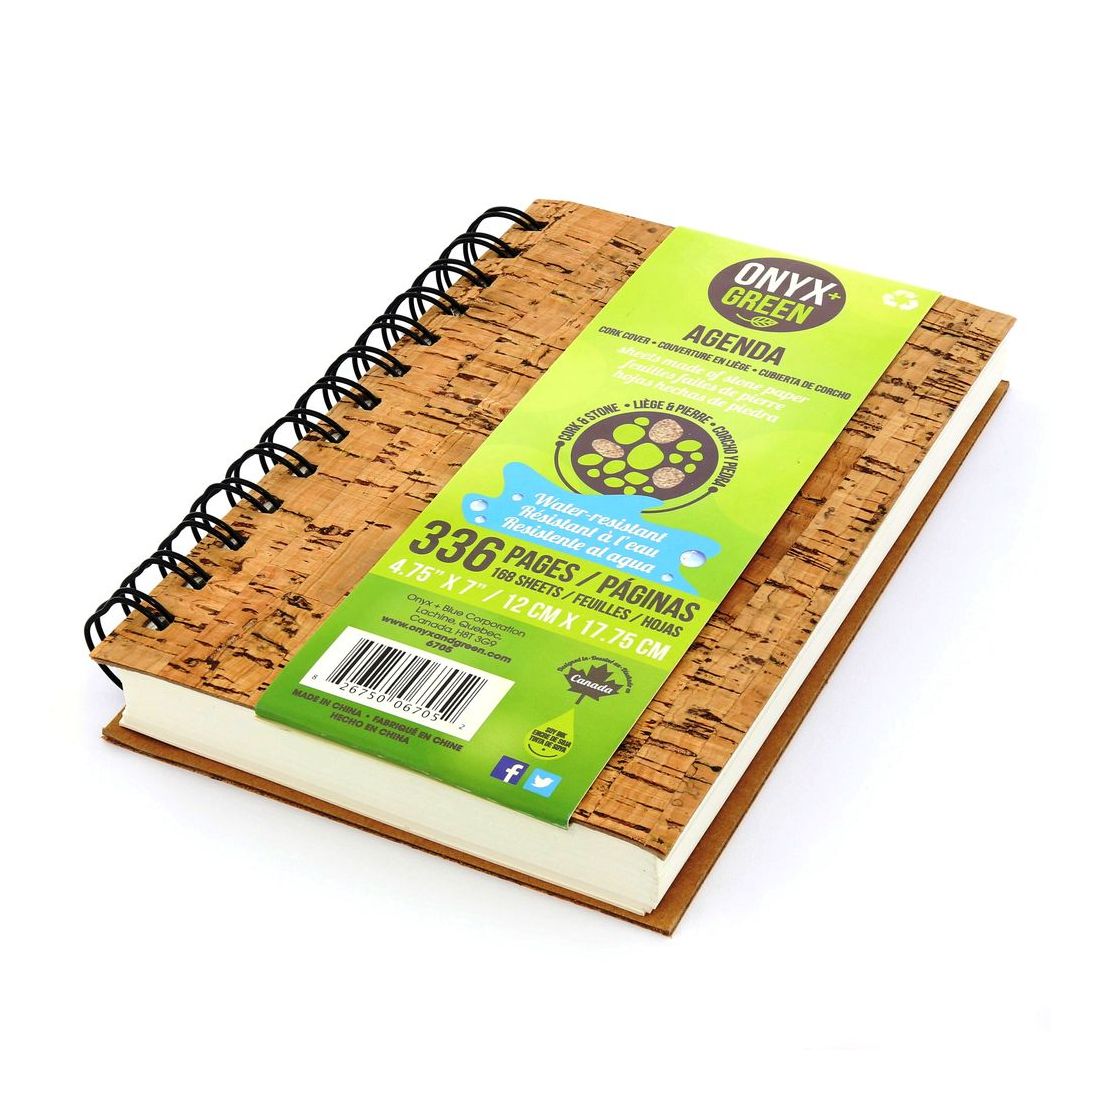 Onyx & Green Spiral Agenda Daily Planner Cork Cover Stone Paper with Undated Sheets Eco Friendly